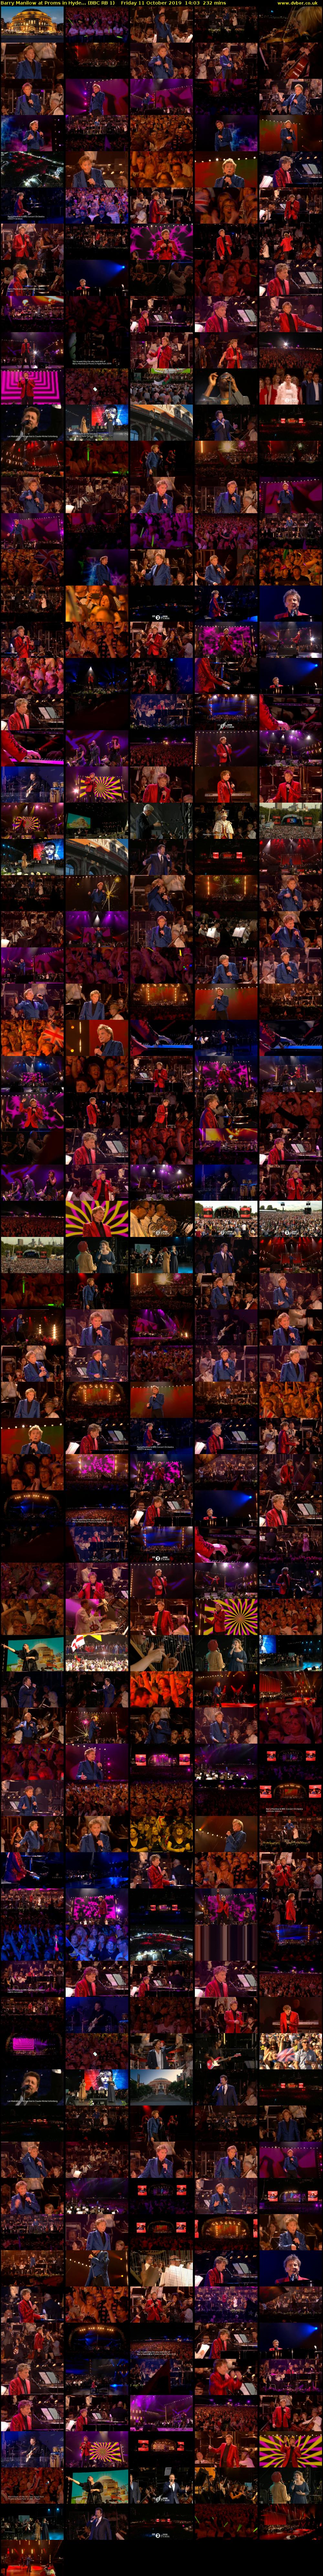 Barry Manilow at Proms in Hyde... (BBC RB 1) Friday 11 October 2019 14:03 - 17:55